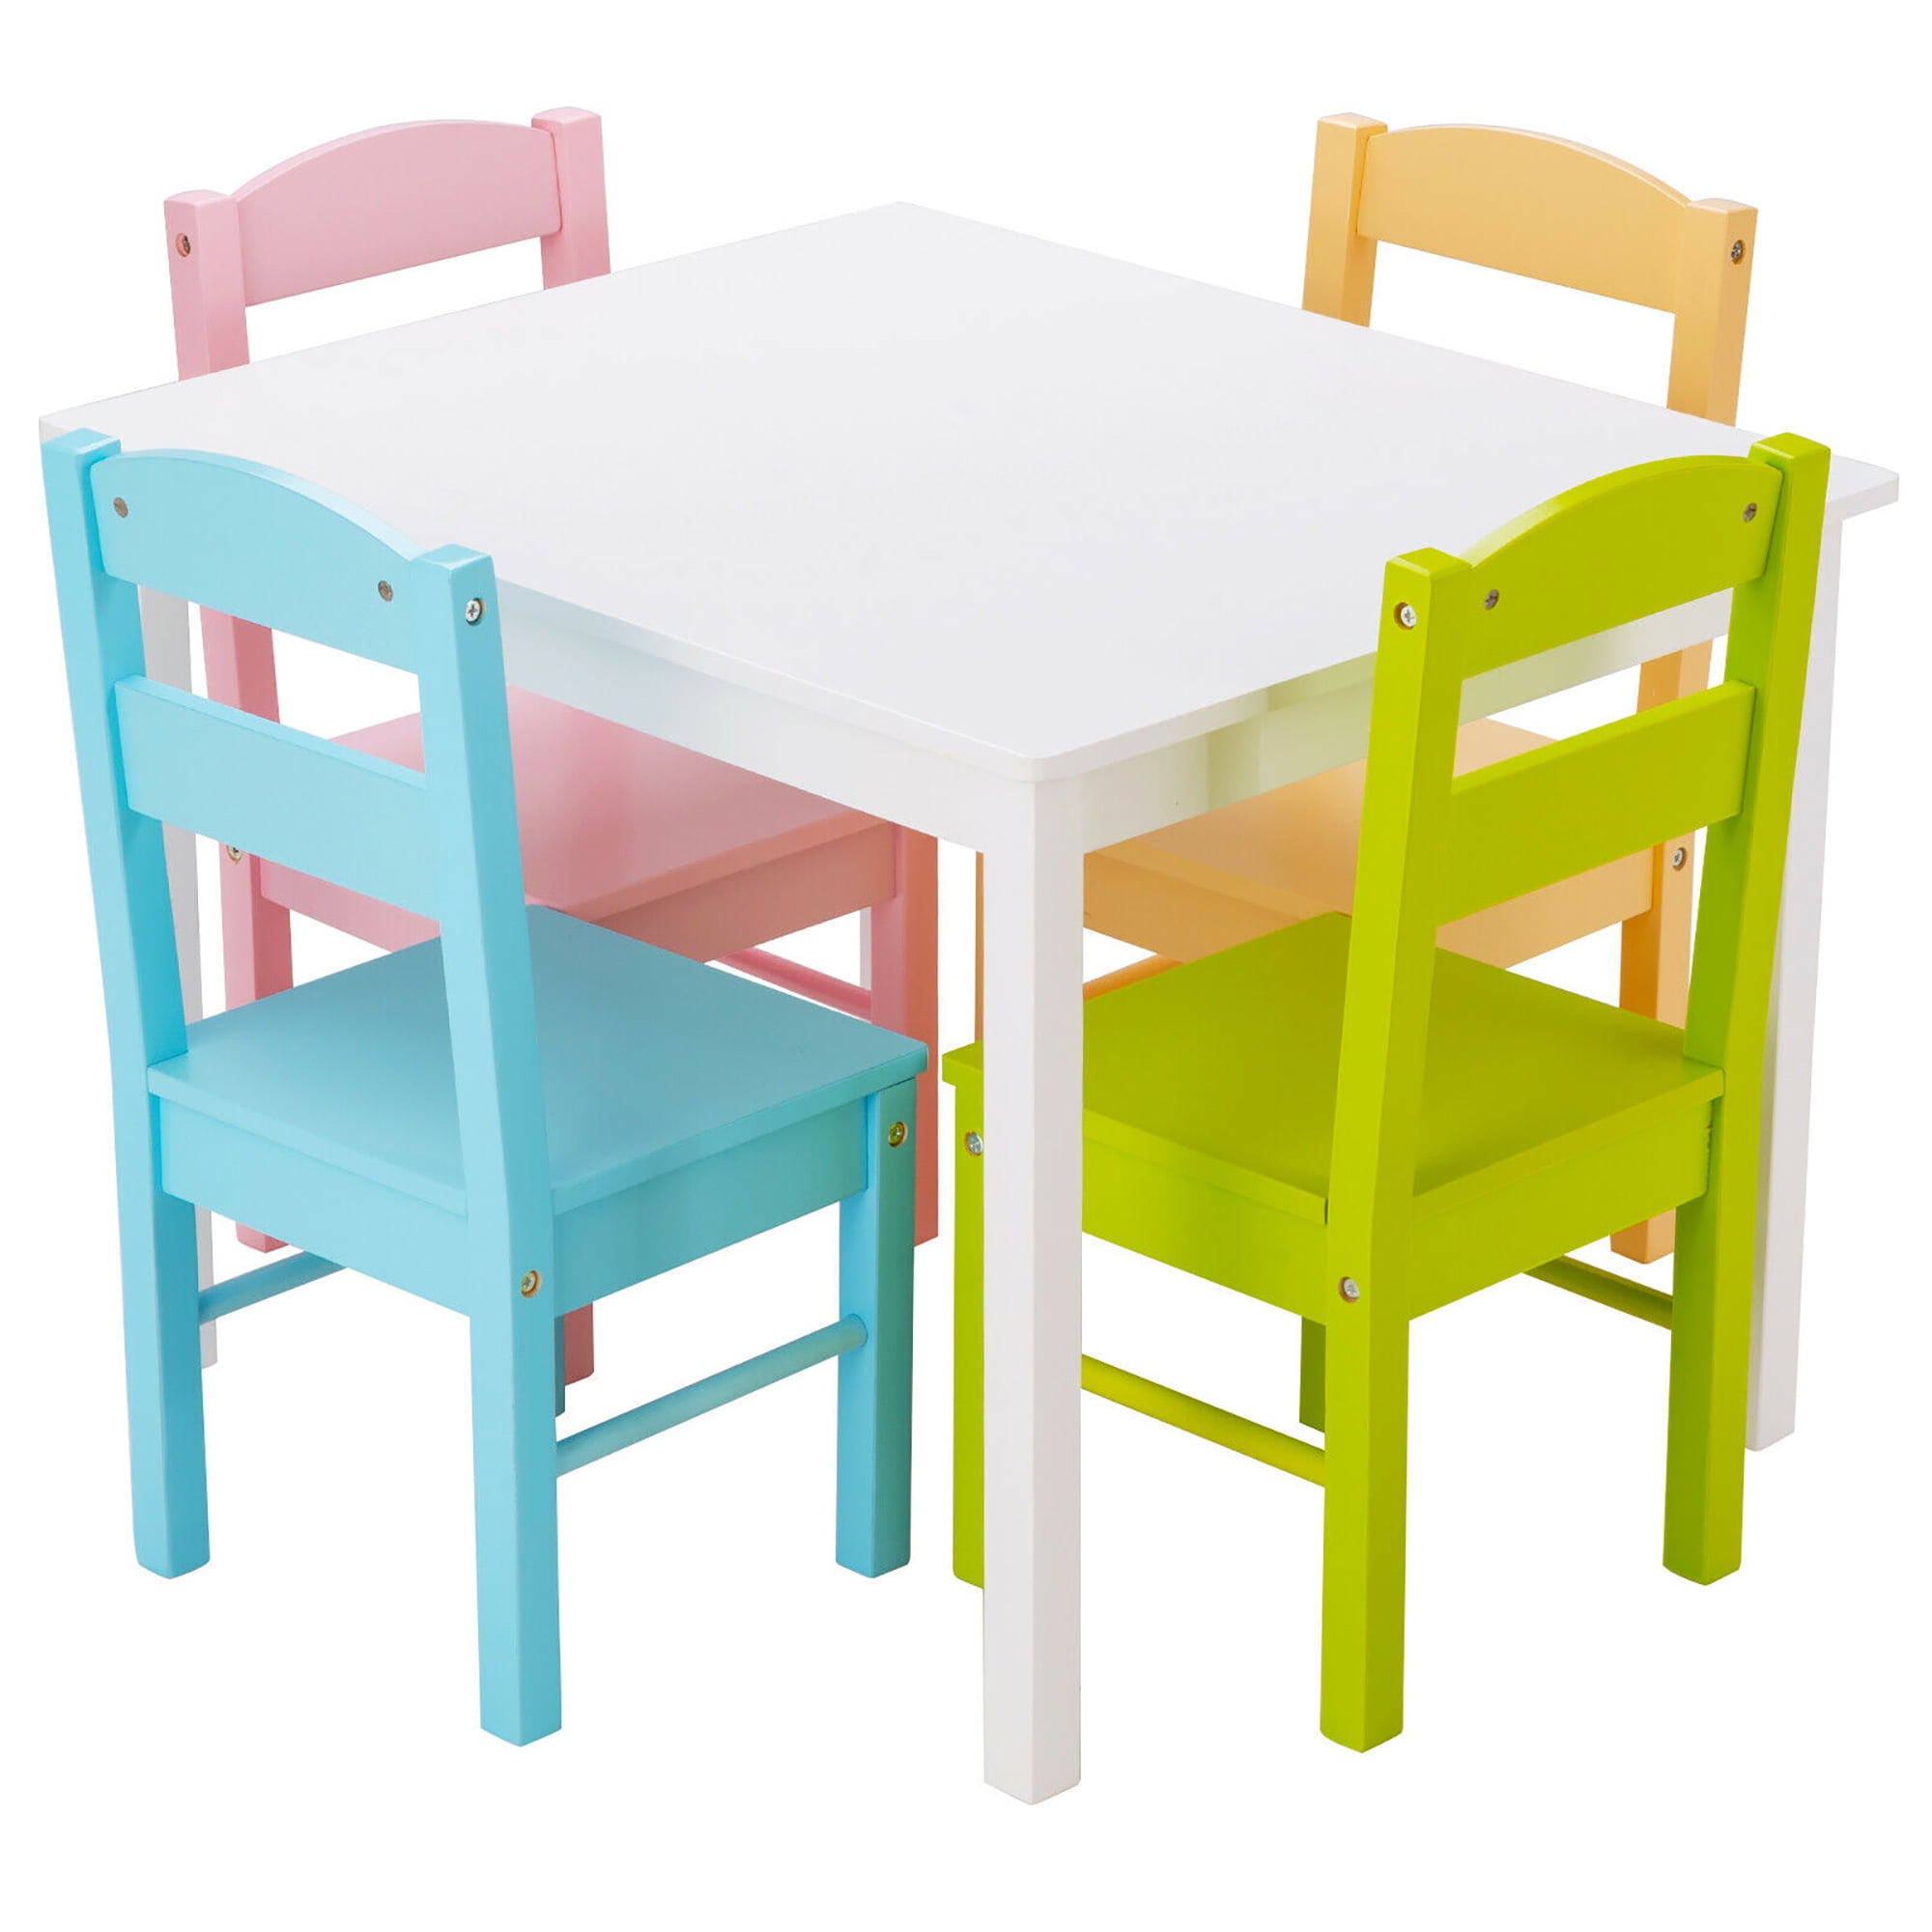 Kiddi Style Childrens Wooden Table and Chair set NEW Kids Toddlers Childs 